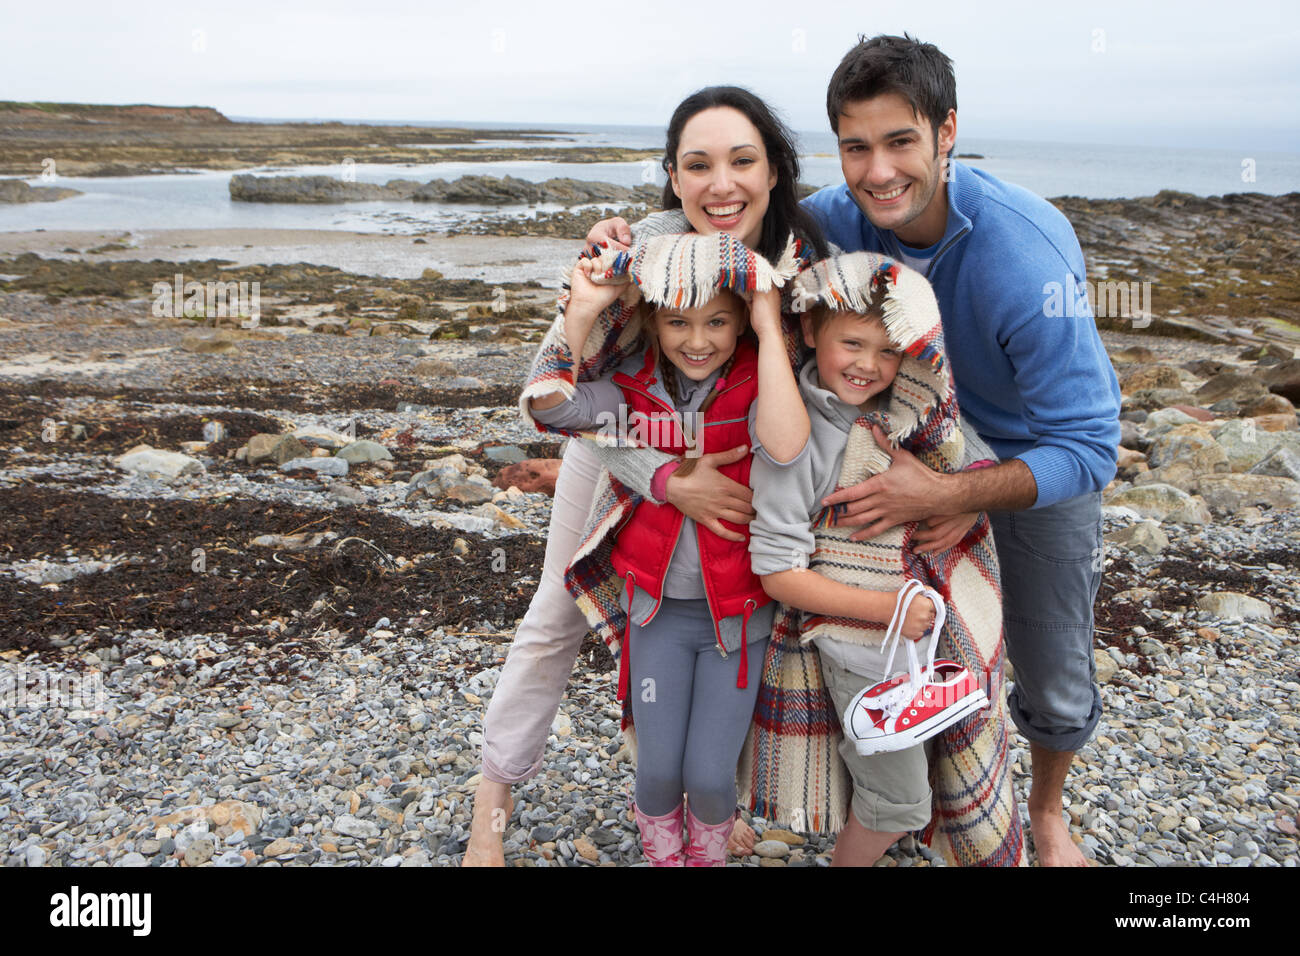 Family on beach with blankets Stock Photo